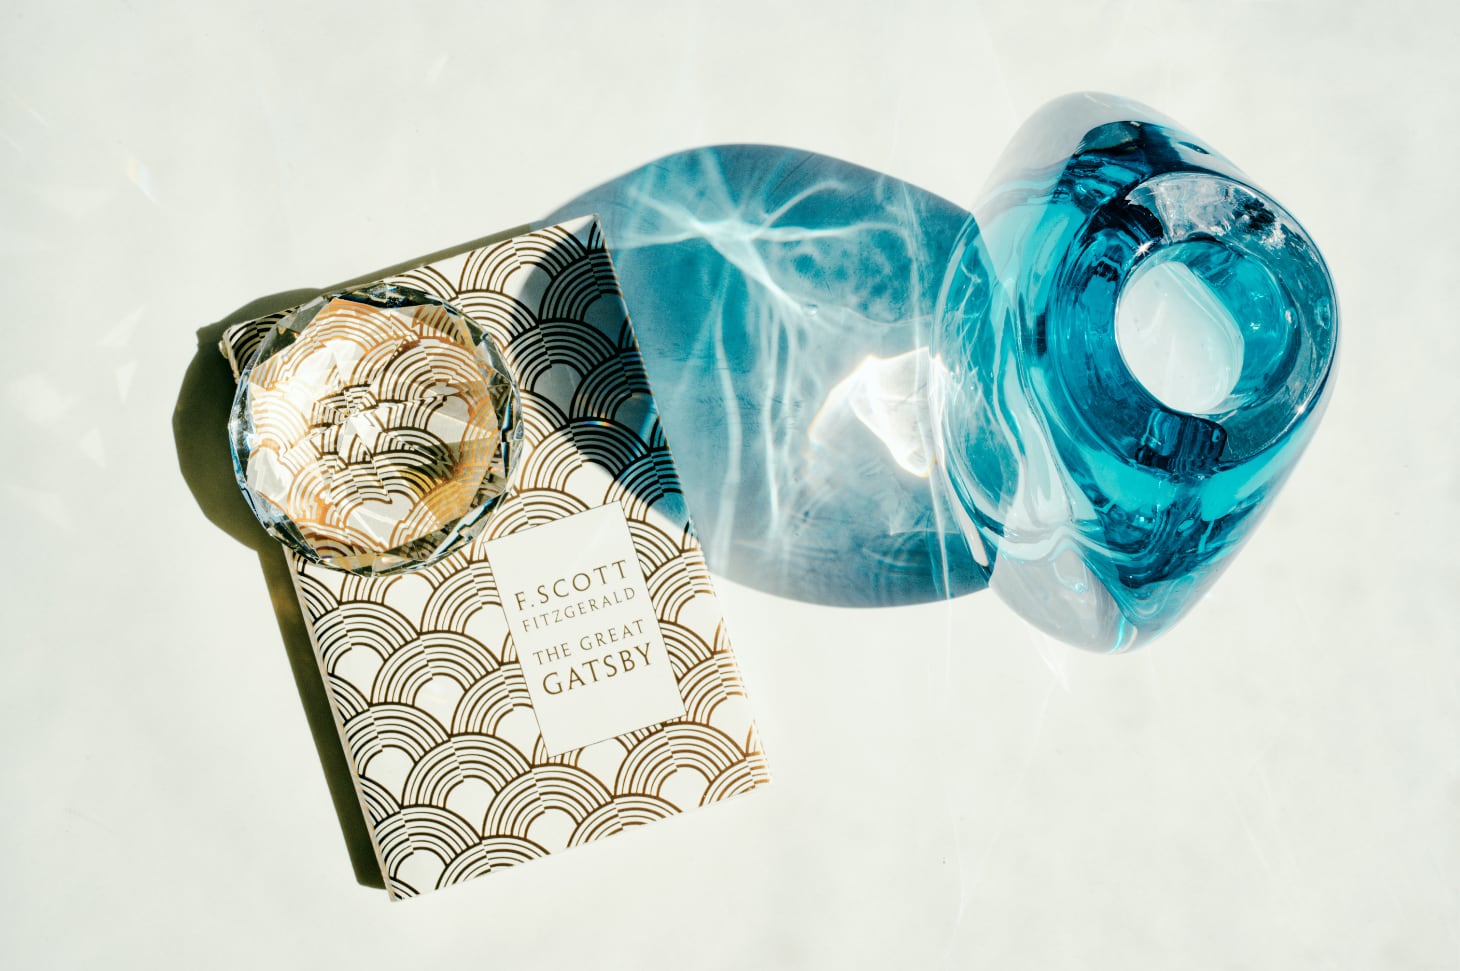 A copy of The Great Gatsby on a white background with a translucent blue vase and a polyhedral clear crystal.